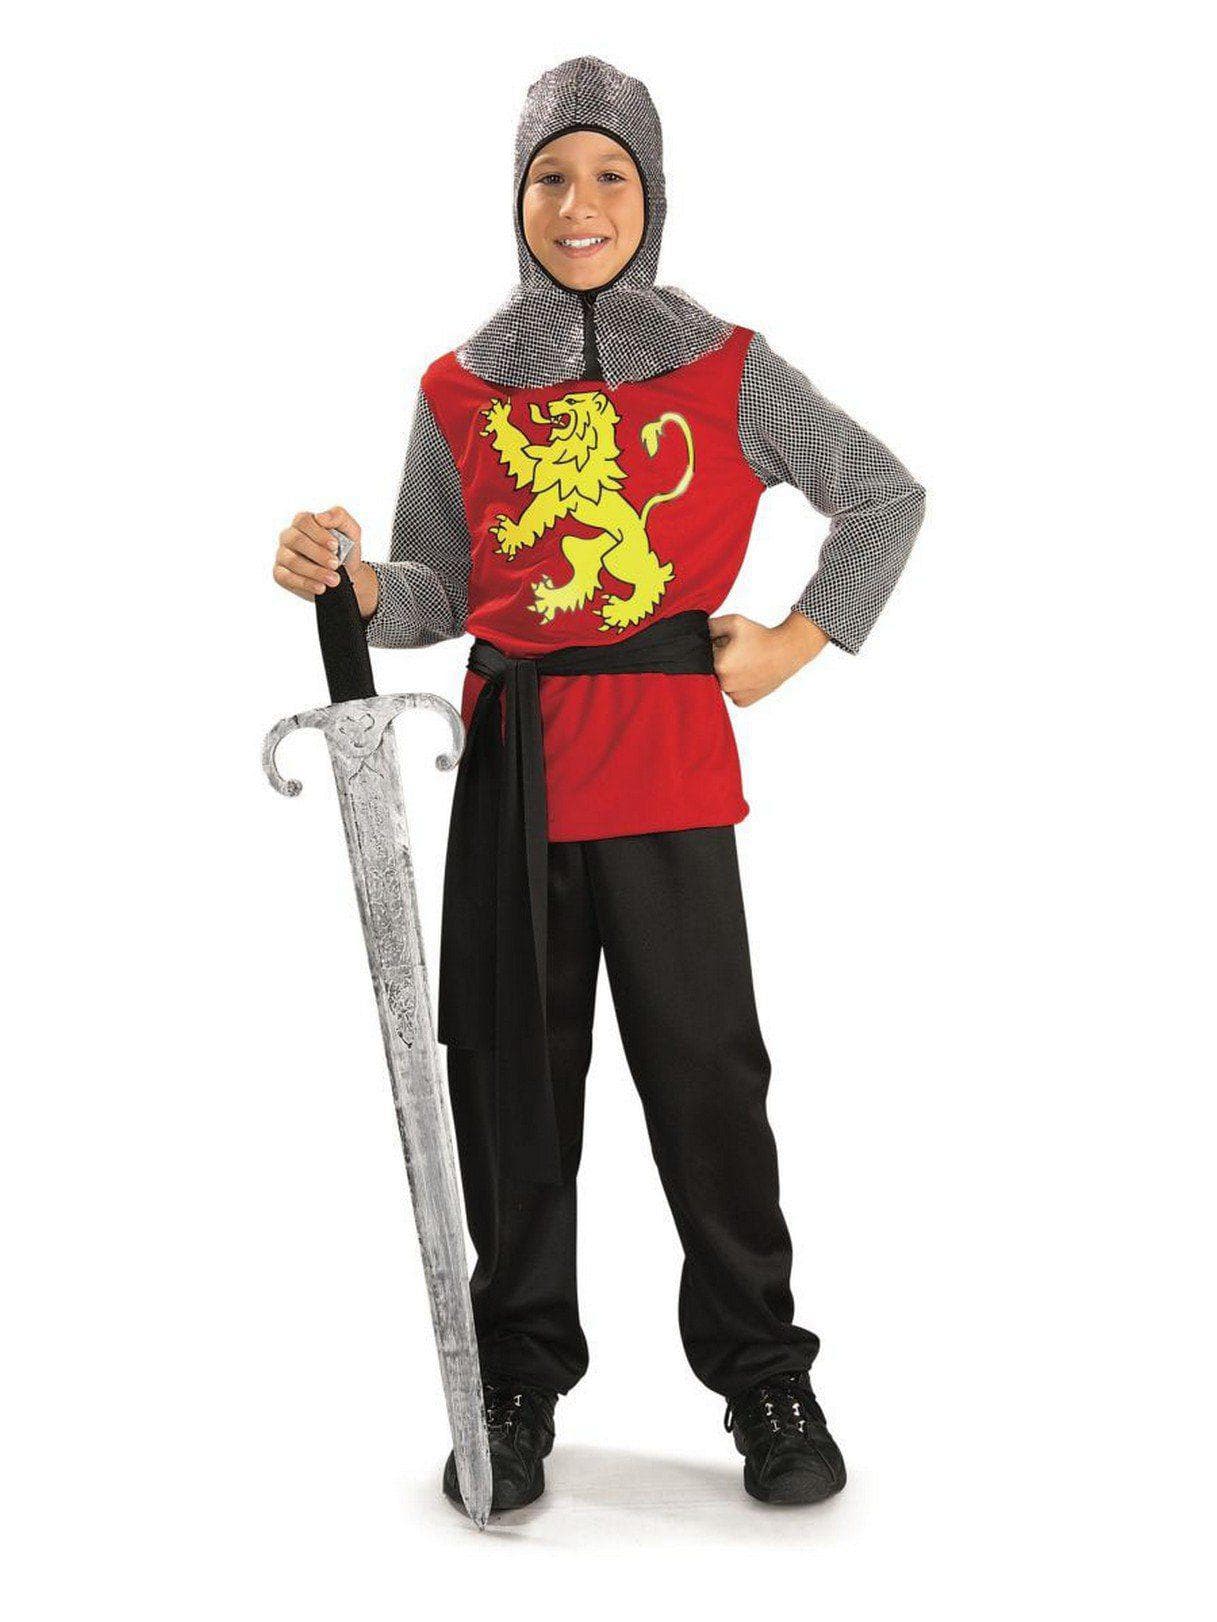 Kids' Medieval Lord Costume - costumes.com